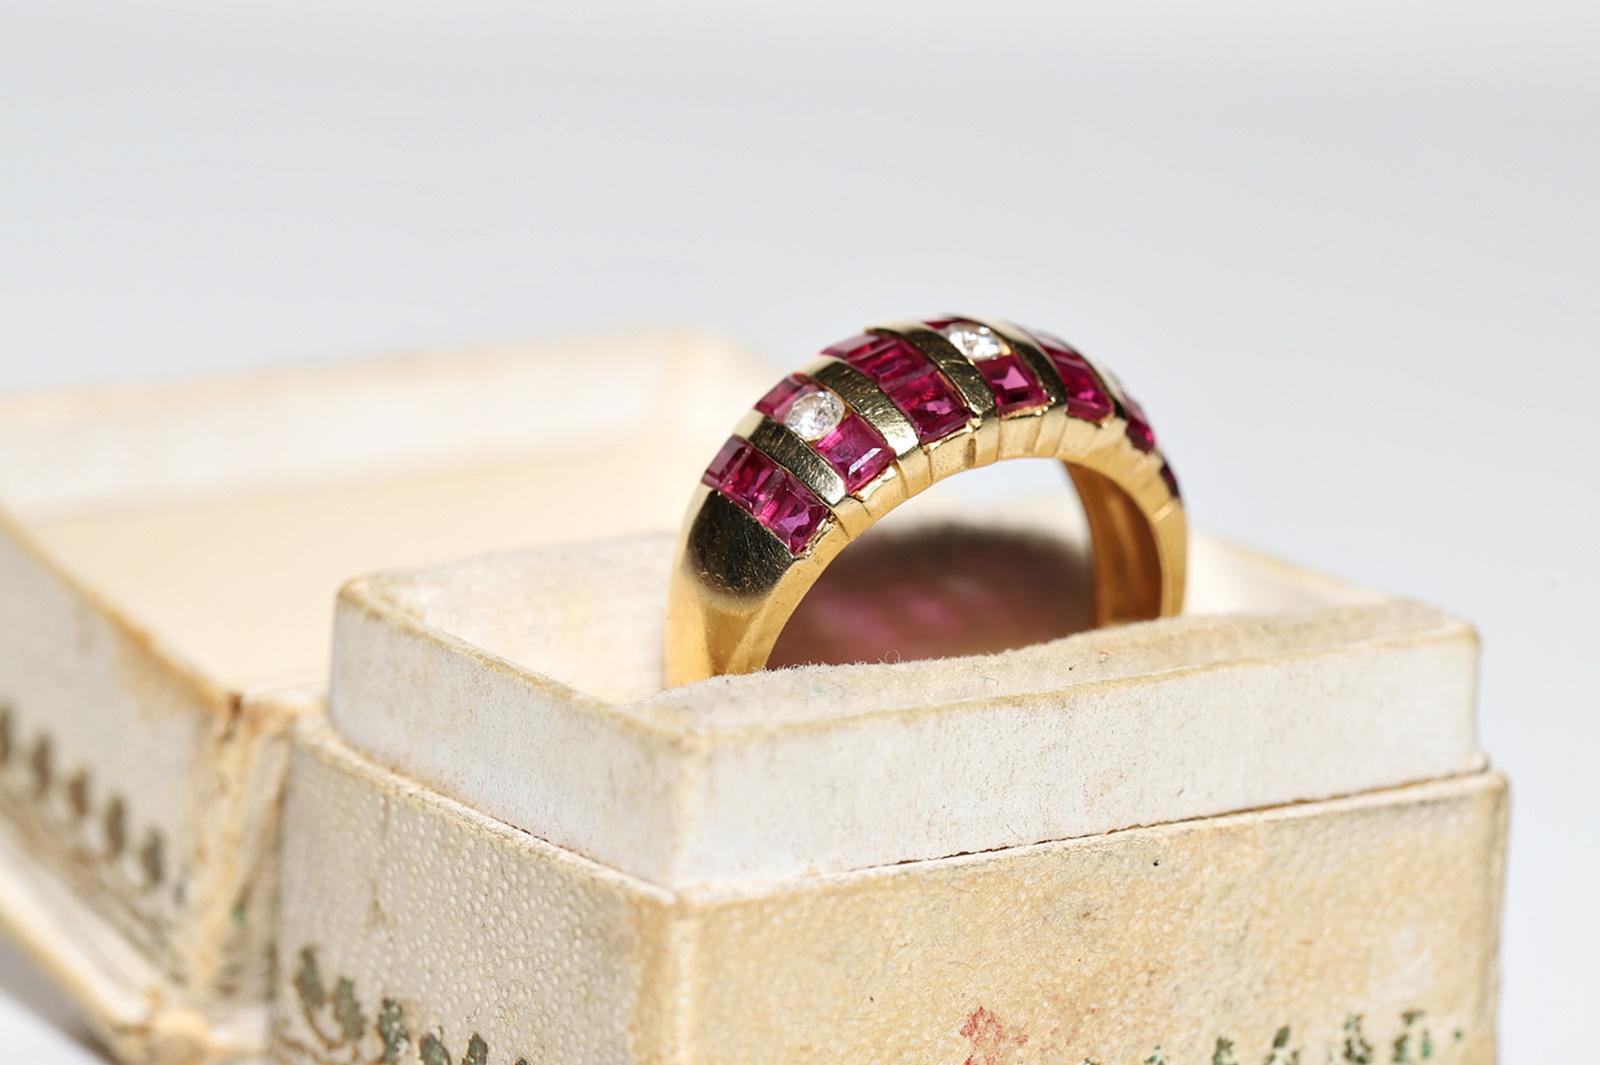 Retro Vintage Circa 1980s 18k Gold Natural Diamond And Caliber Ruby Decorated Ring For Sale